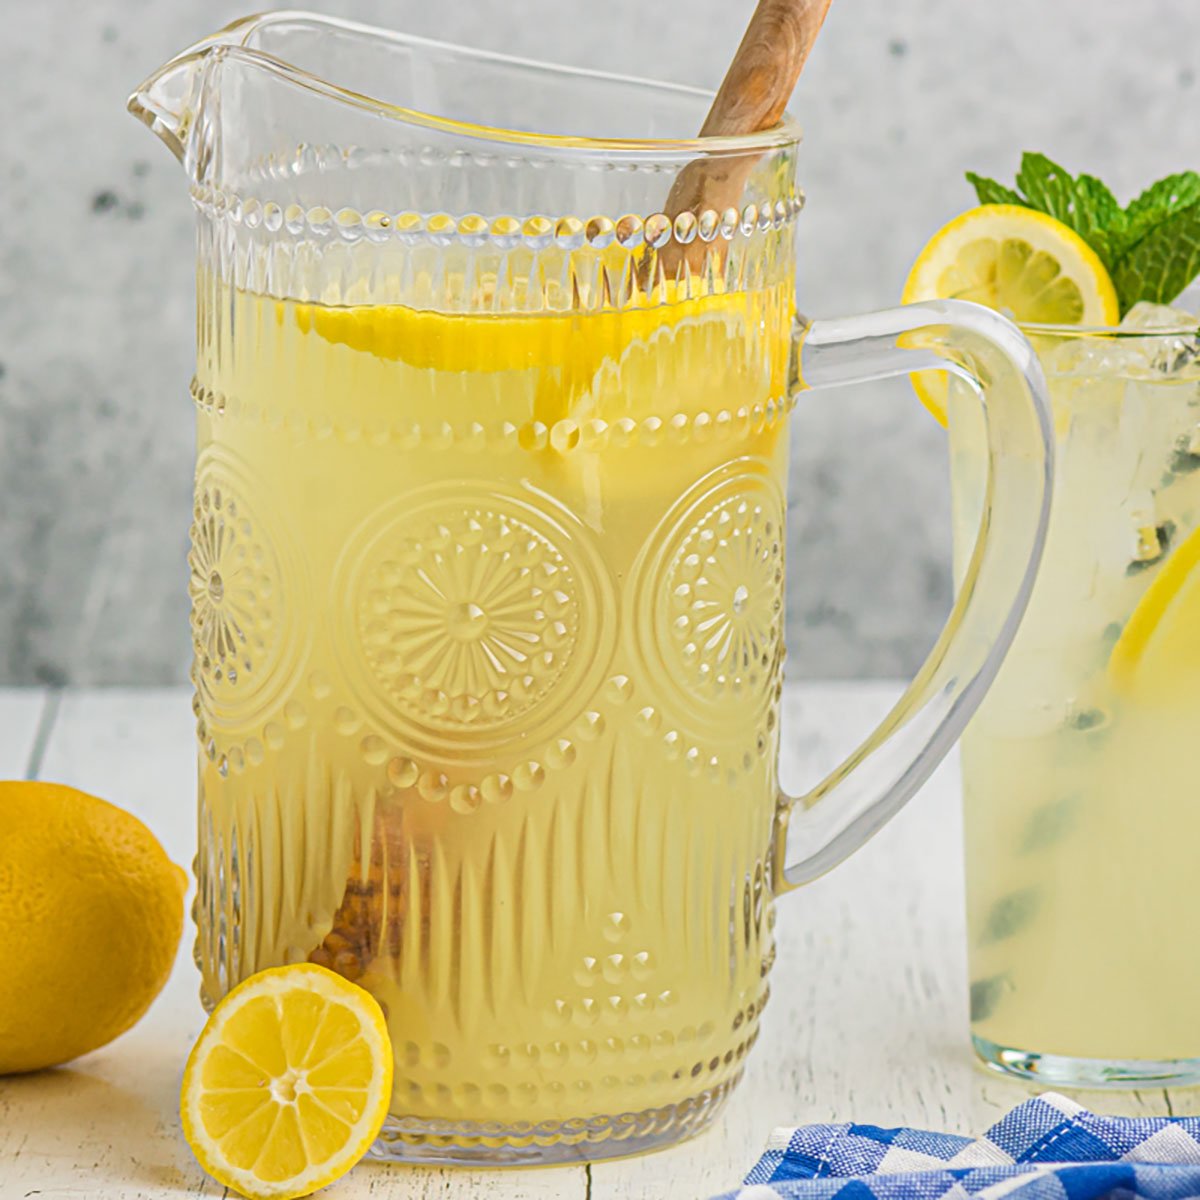 https://www.persnicketyplates.com/wp-content/uploads/2016/05/homemade-old-fashioned-lemonade45.j-SQUAREpg.jpg